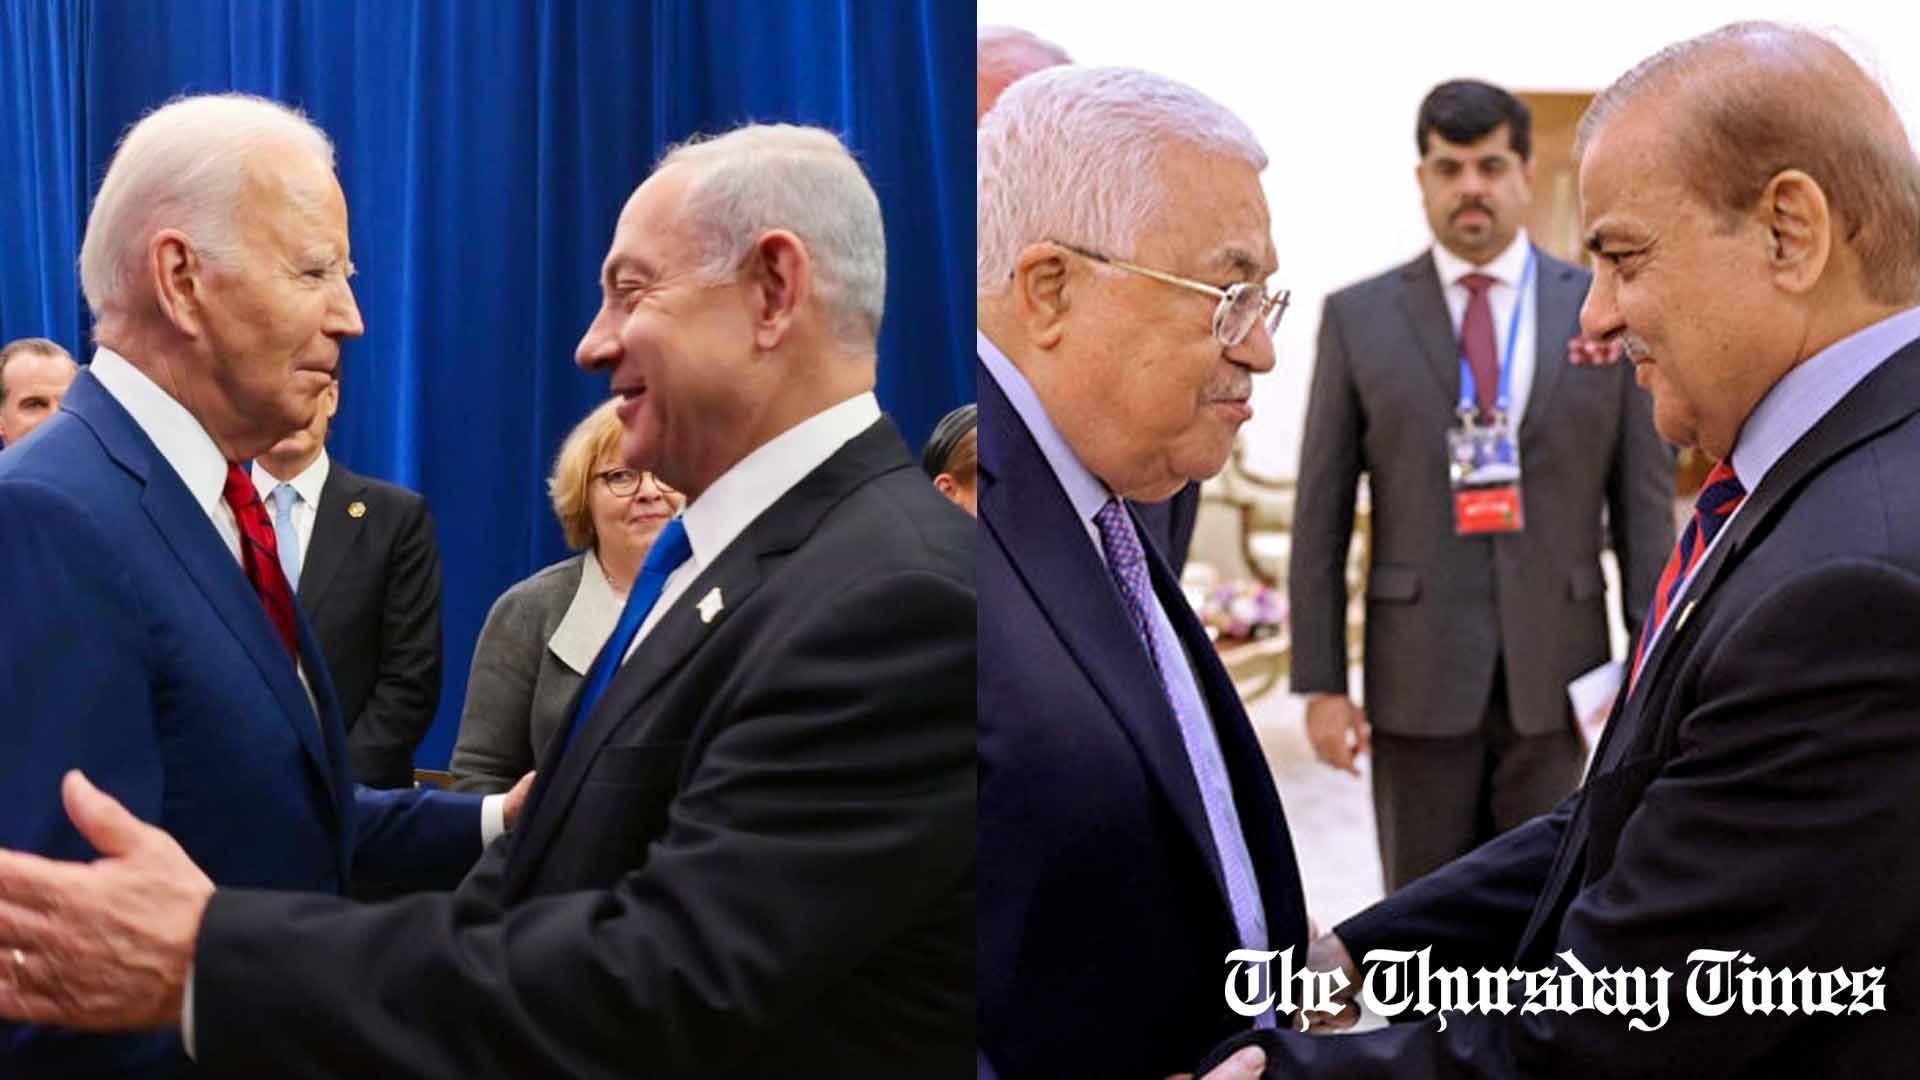 A combined file photo is shown of U.S. president Joe Biden with Israeli PM Benjamin Netanyahu (L) and Palestinian president Mahmoud Abbas with former Pakistani prime minister Shehbaz Sharif (R). — FILE/THE THURSDAY TIMES